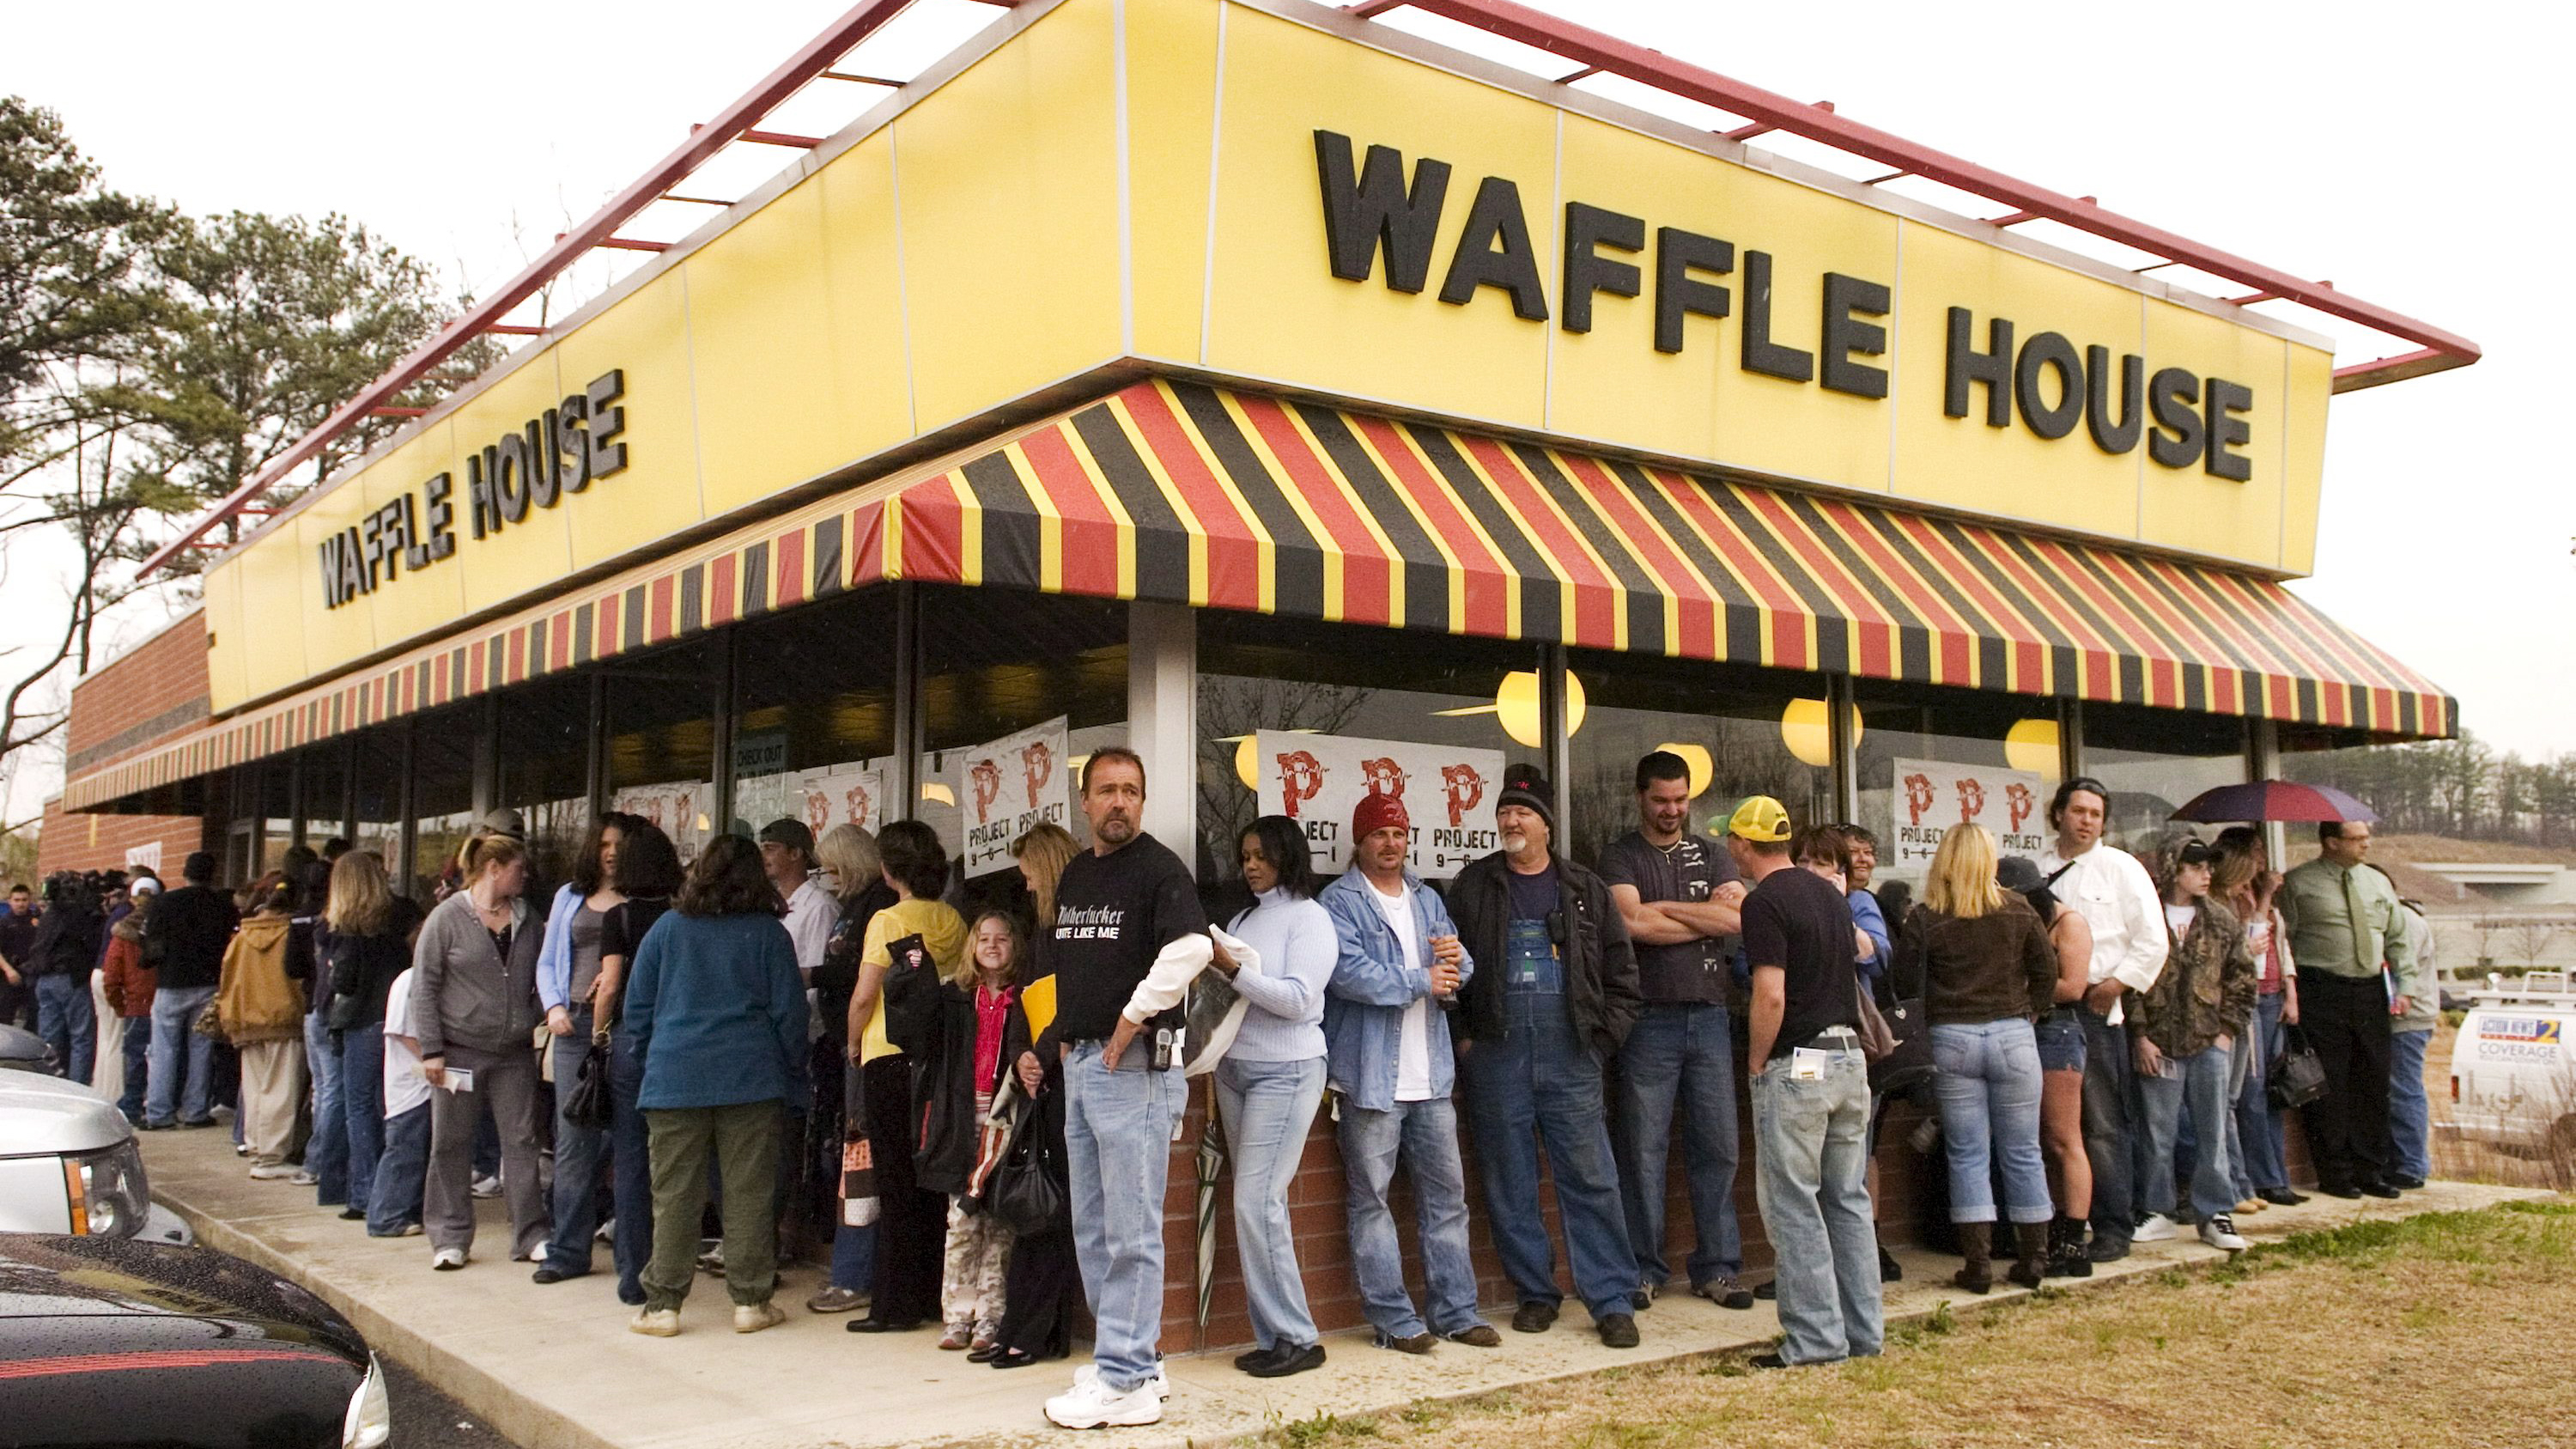 what-waffle-house-means-to-southerners-d41dd4fd-3095-4c07-877d-1f9673fd46e9.jpg